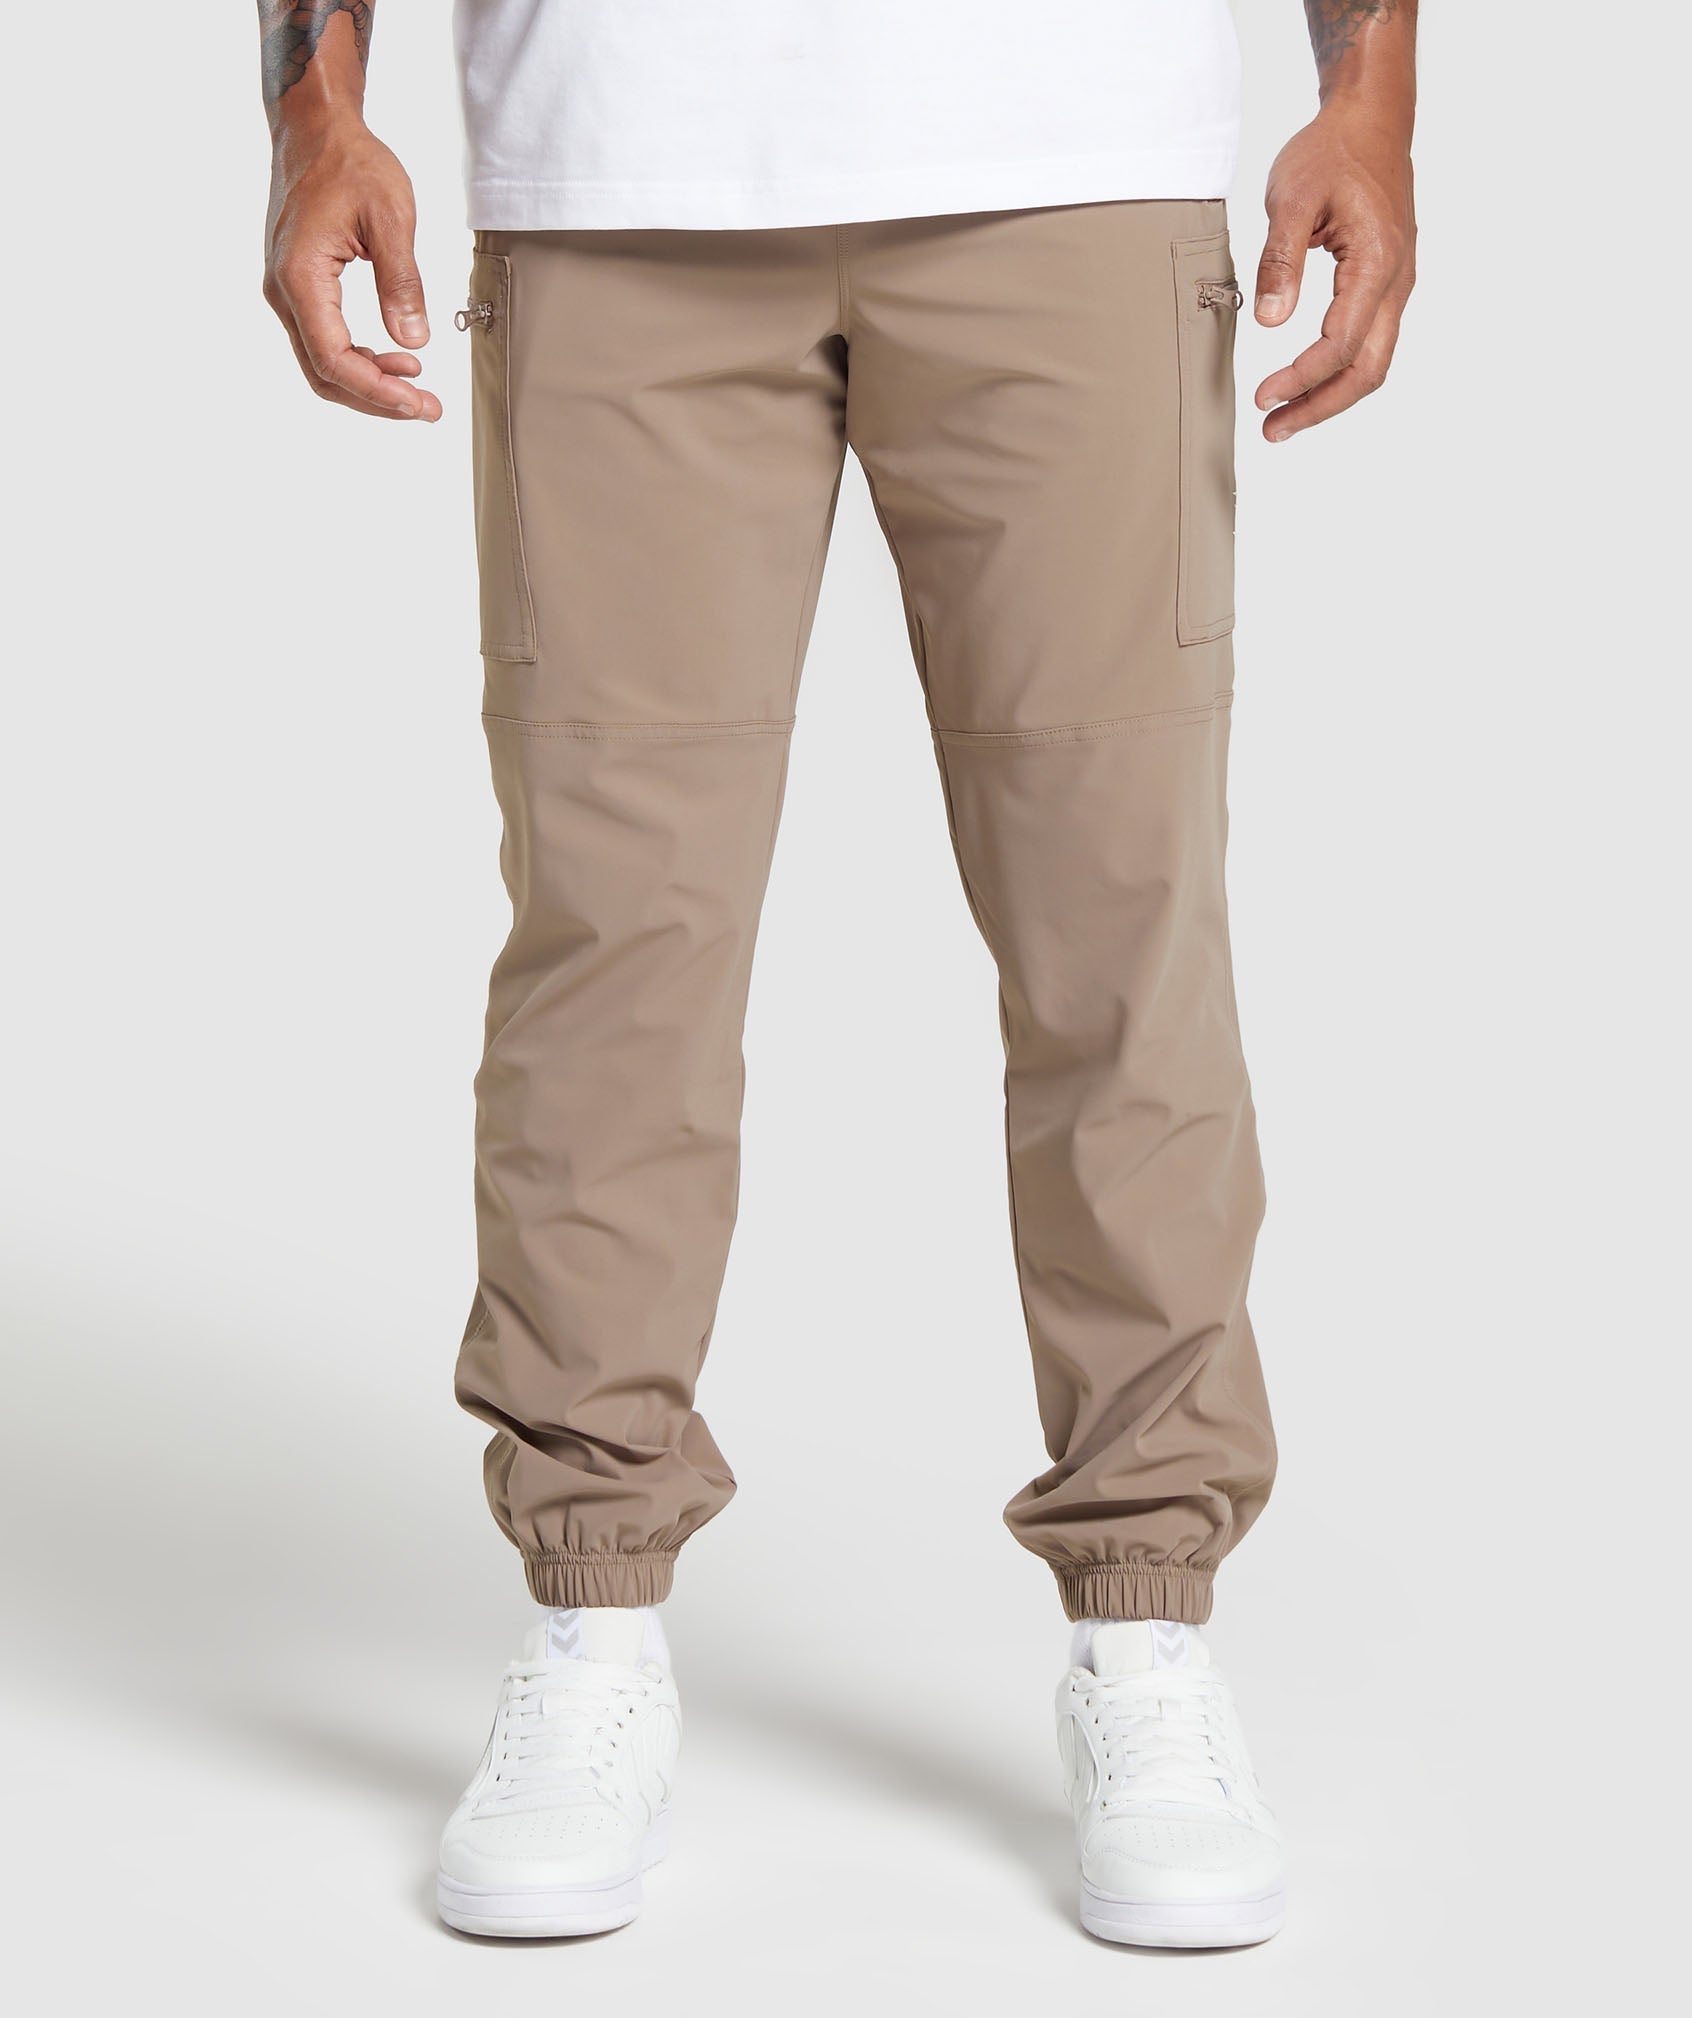 Rest Day Cargo Pants in Mocha Mauve - view 2